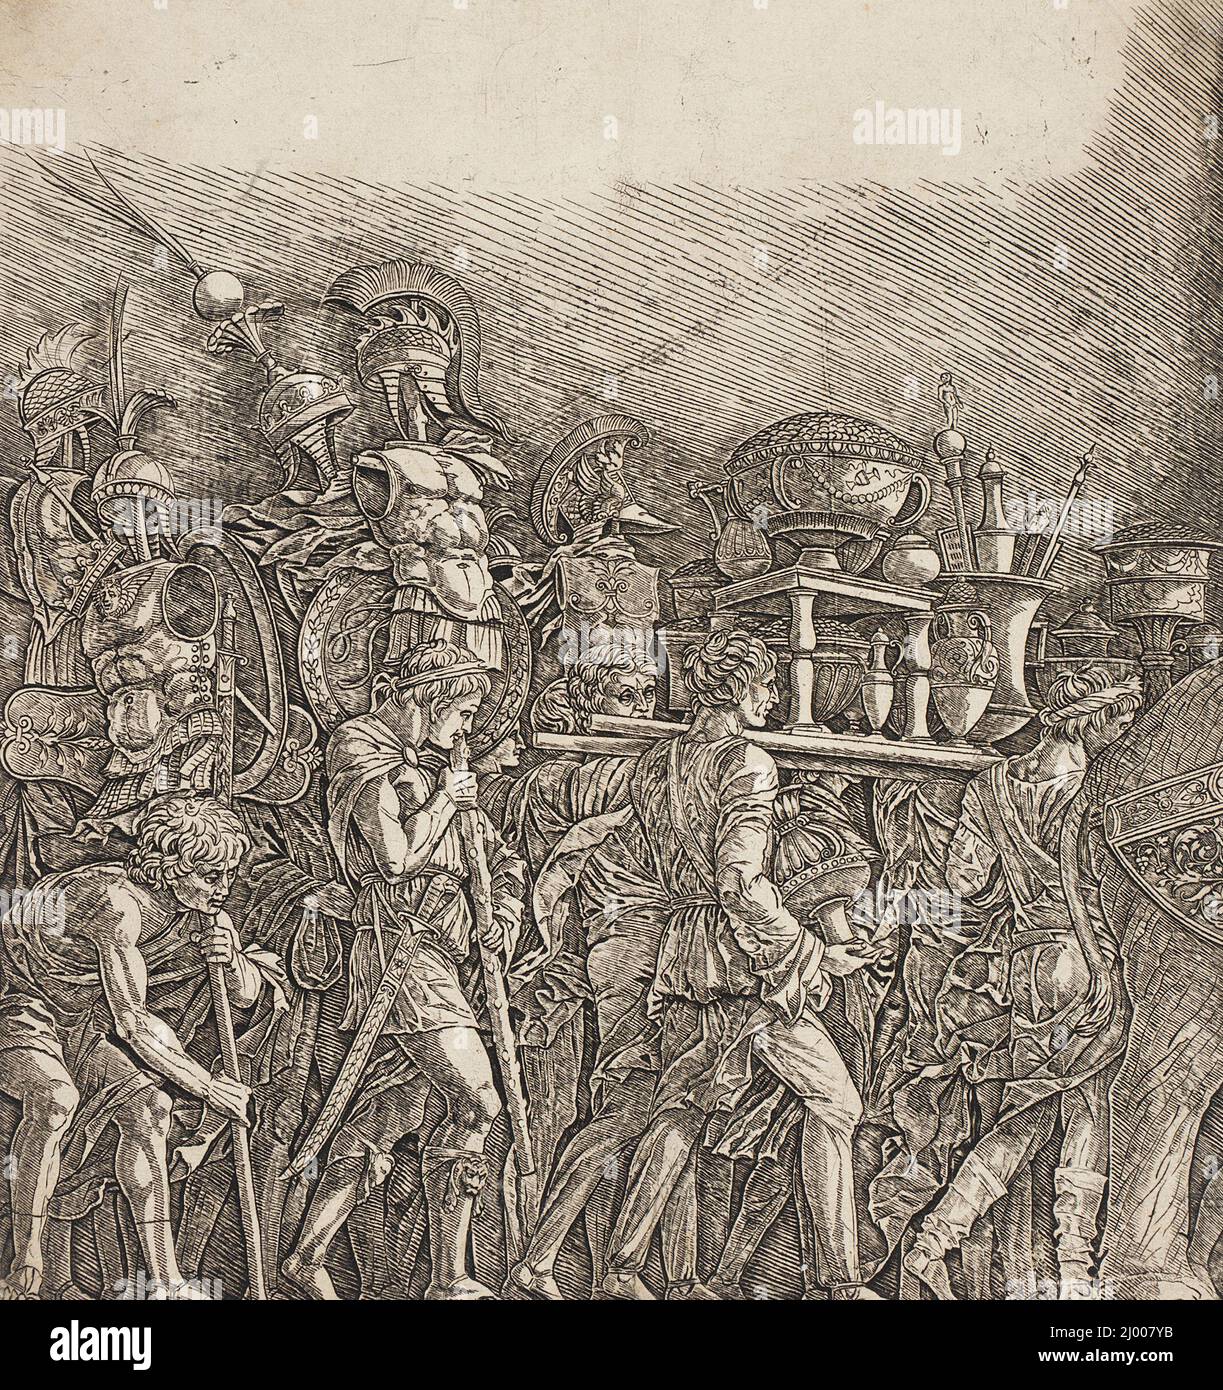 Soldiers Carrying Trophies. Mantegna, Andrea (Italy, Isola di Cartura, 1431-1506). Italy, 1470-1500. Prints; engravings. Engraving Stock Photo